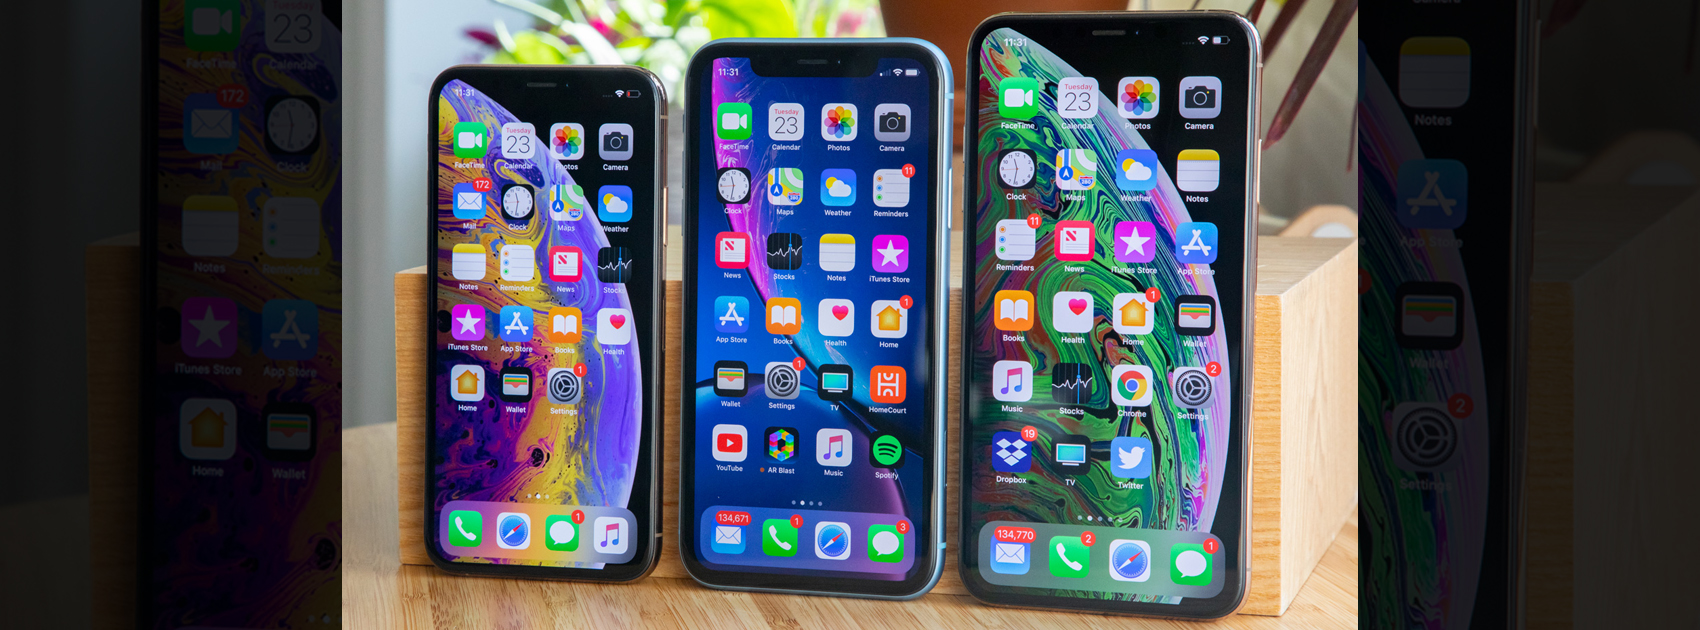 iPhone Unknown Facts,Startup Stories,iphone Facts 2019,iphone Facts,Interesting Facts 2019,iphone Facts and History,iPhone Latest News,Apple iphone Facts,iPhone Founder Steve Jobs,Amazing iphone Facts,Unknown Facts About Apple iphone